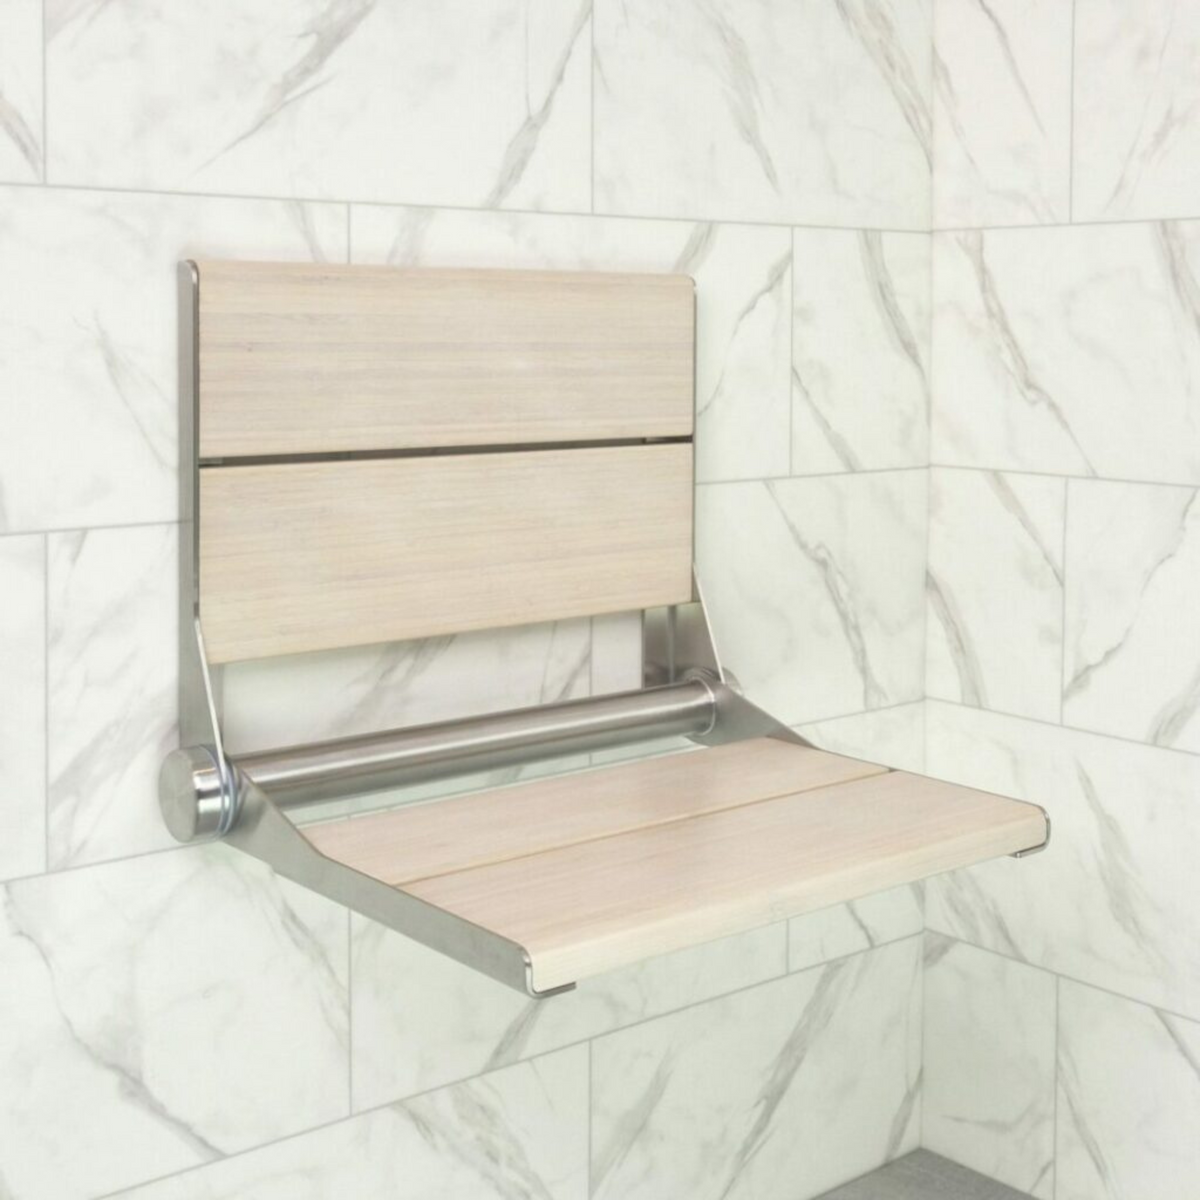 Folding Shower Bench with Stainless Steel Frame (26")